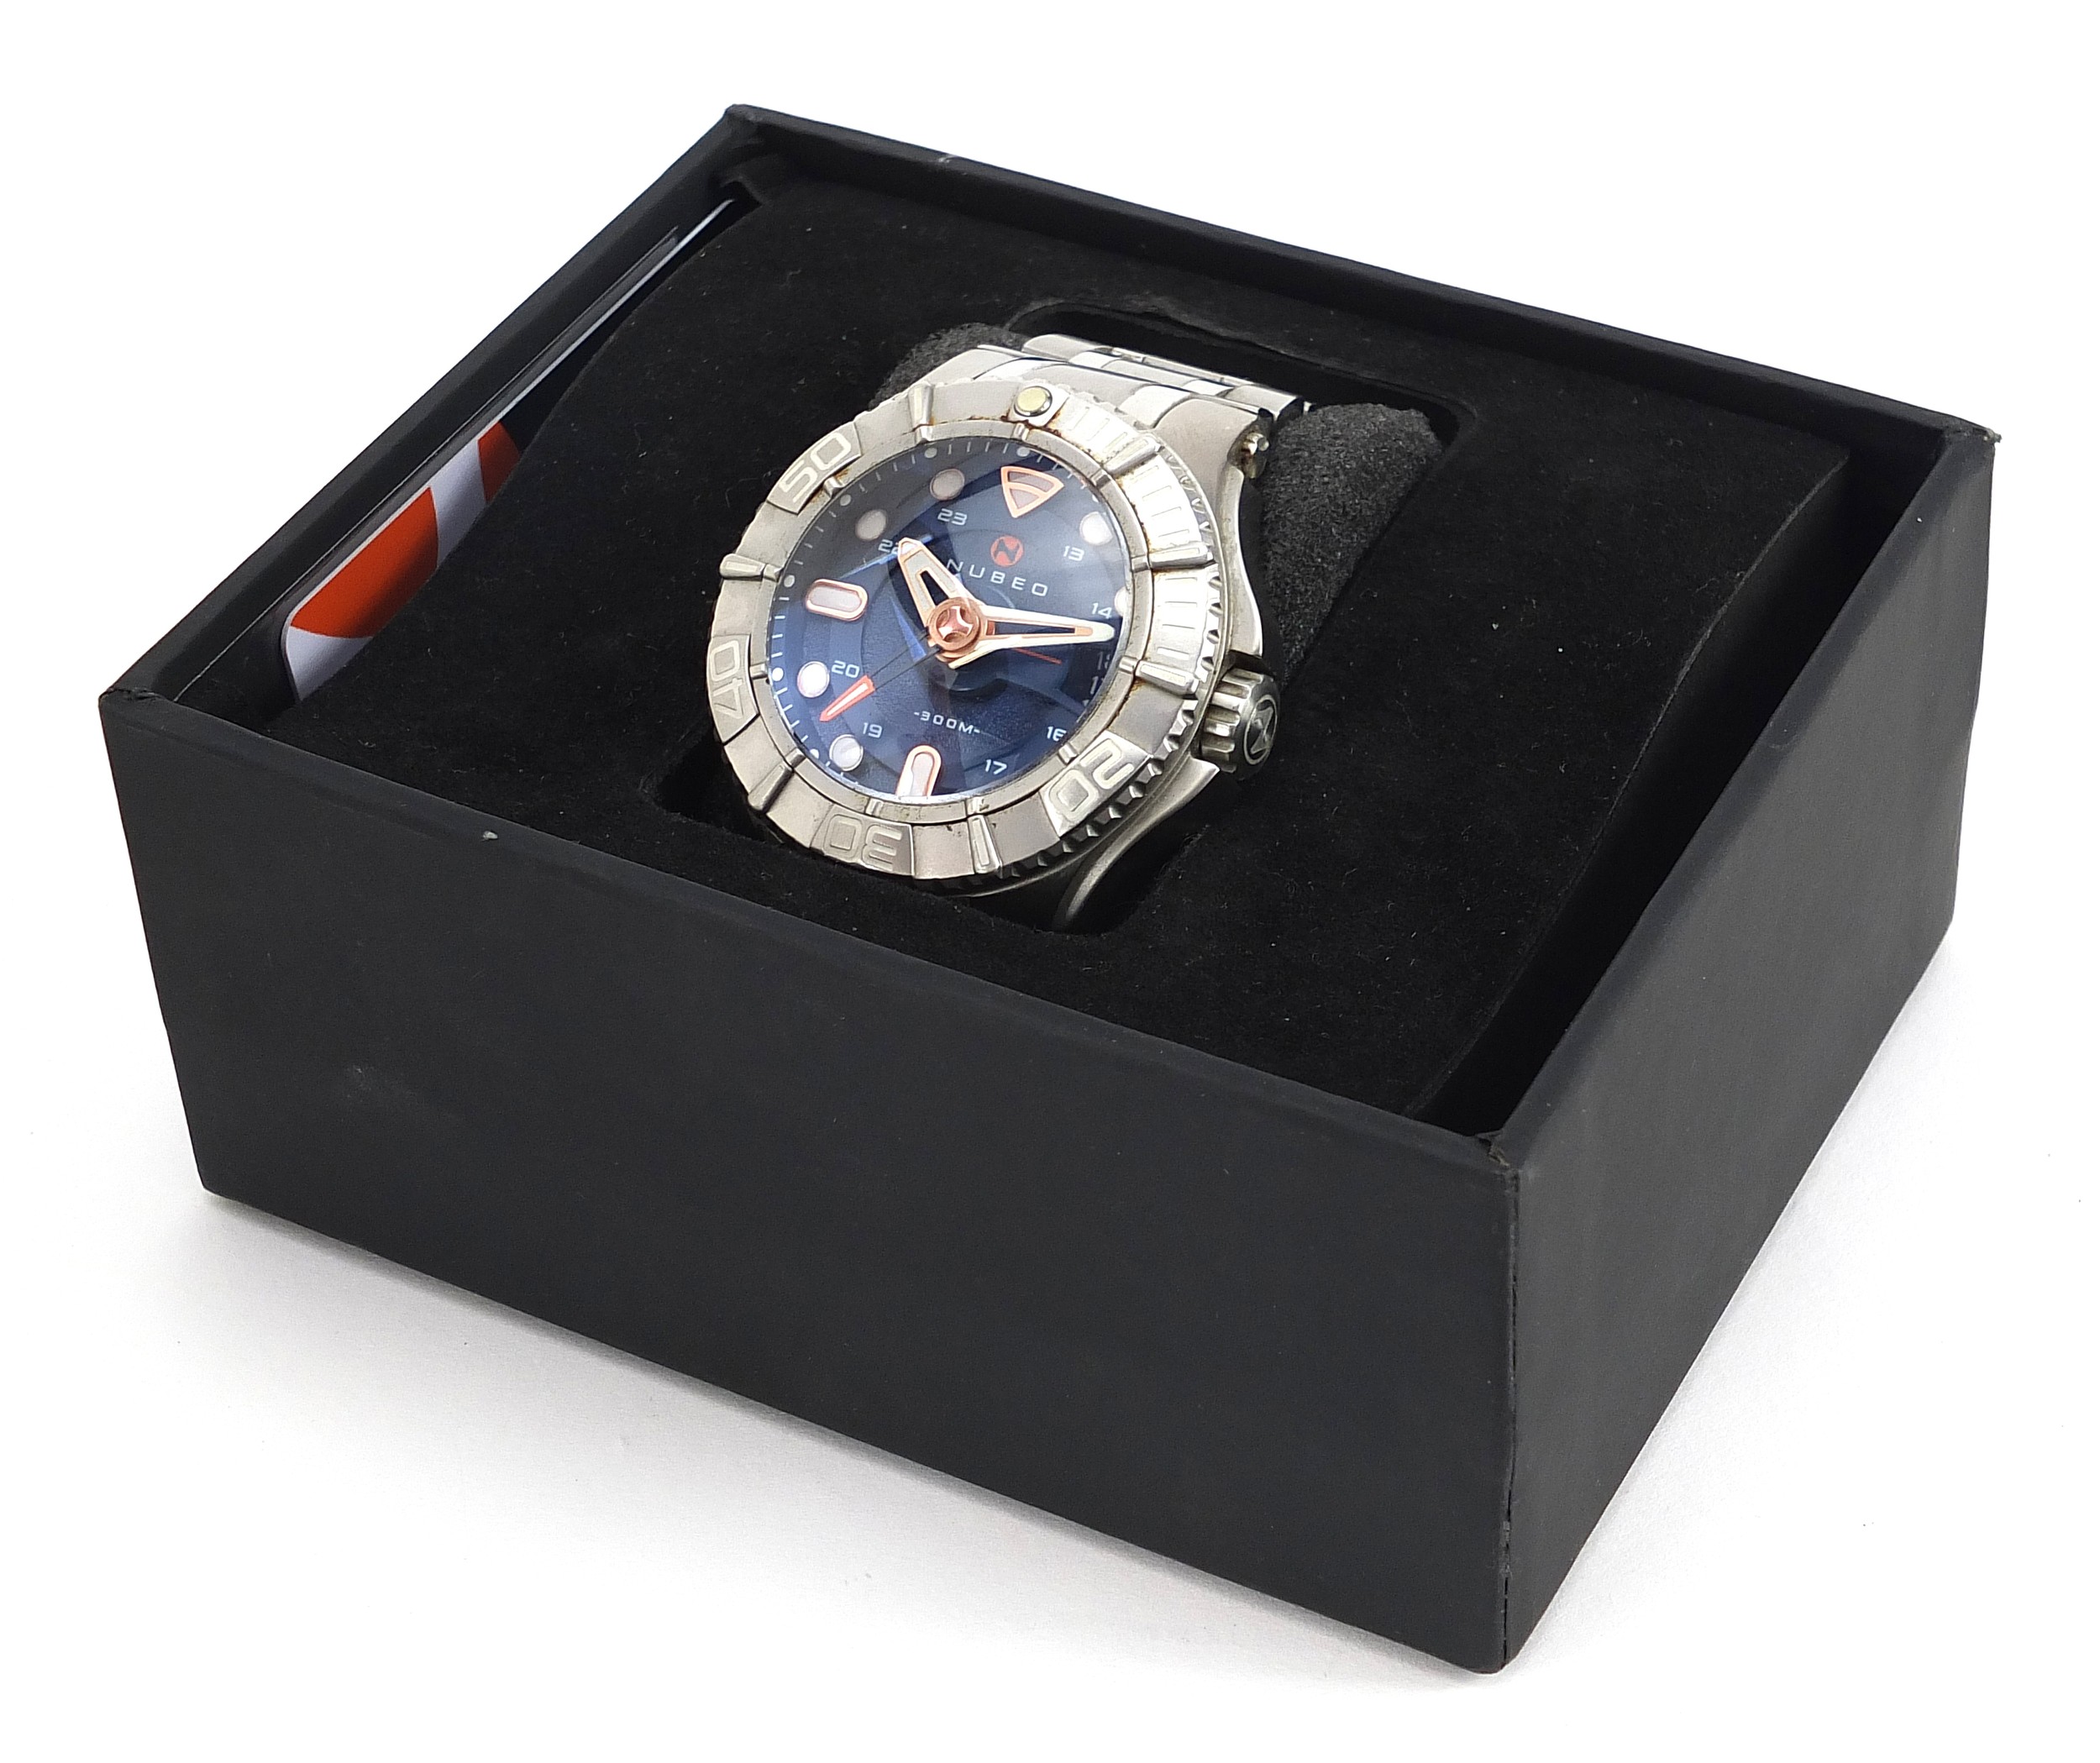 Nubeo gentlemen's WR 300 metre automatic wristwatch with box and paperwork, 50mm in diameter - Image 7 of 8